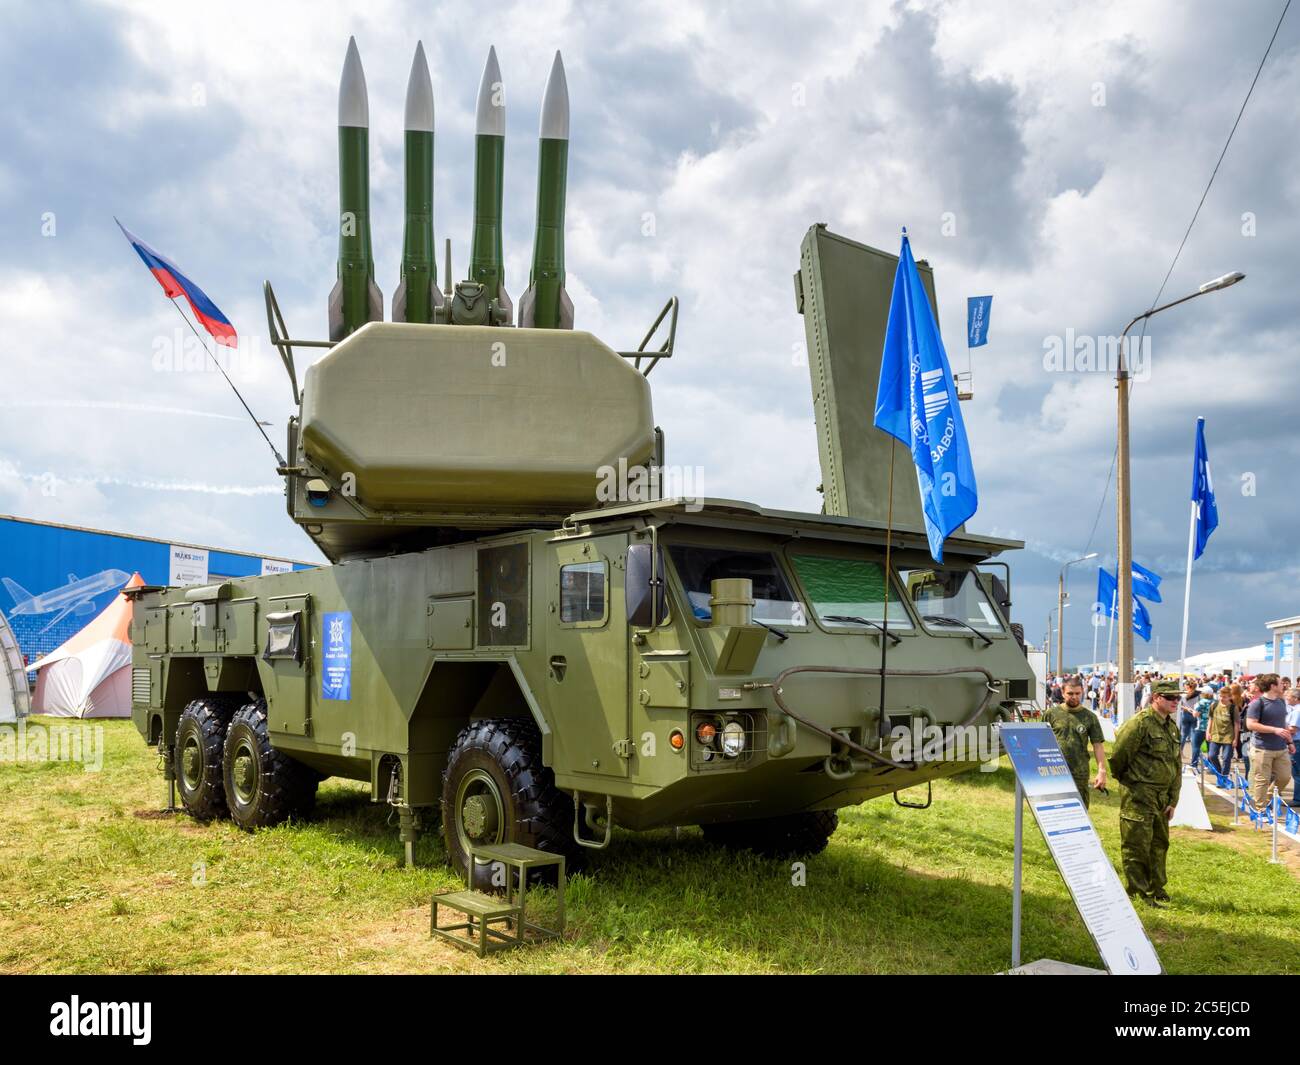 Moscow Region - July 21, 2017: The Buk-M2 russian missile system at the International Aviation and Space Salon (MAKS). Stock Photo